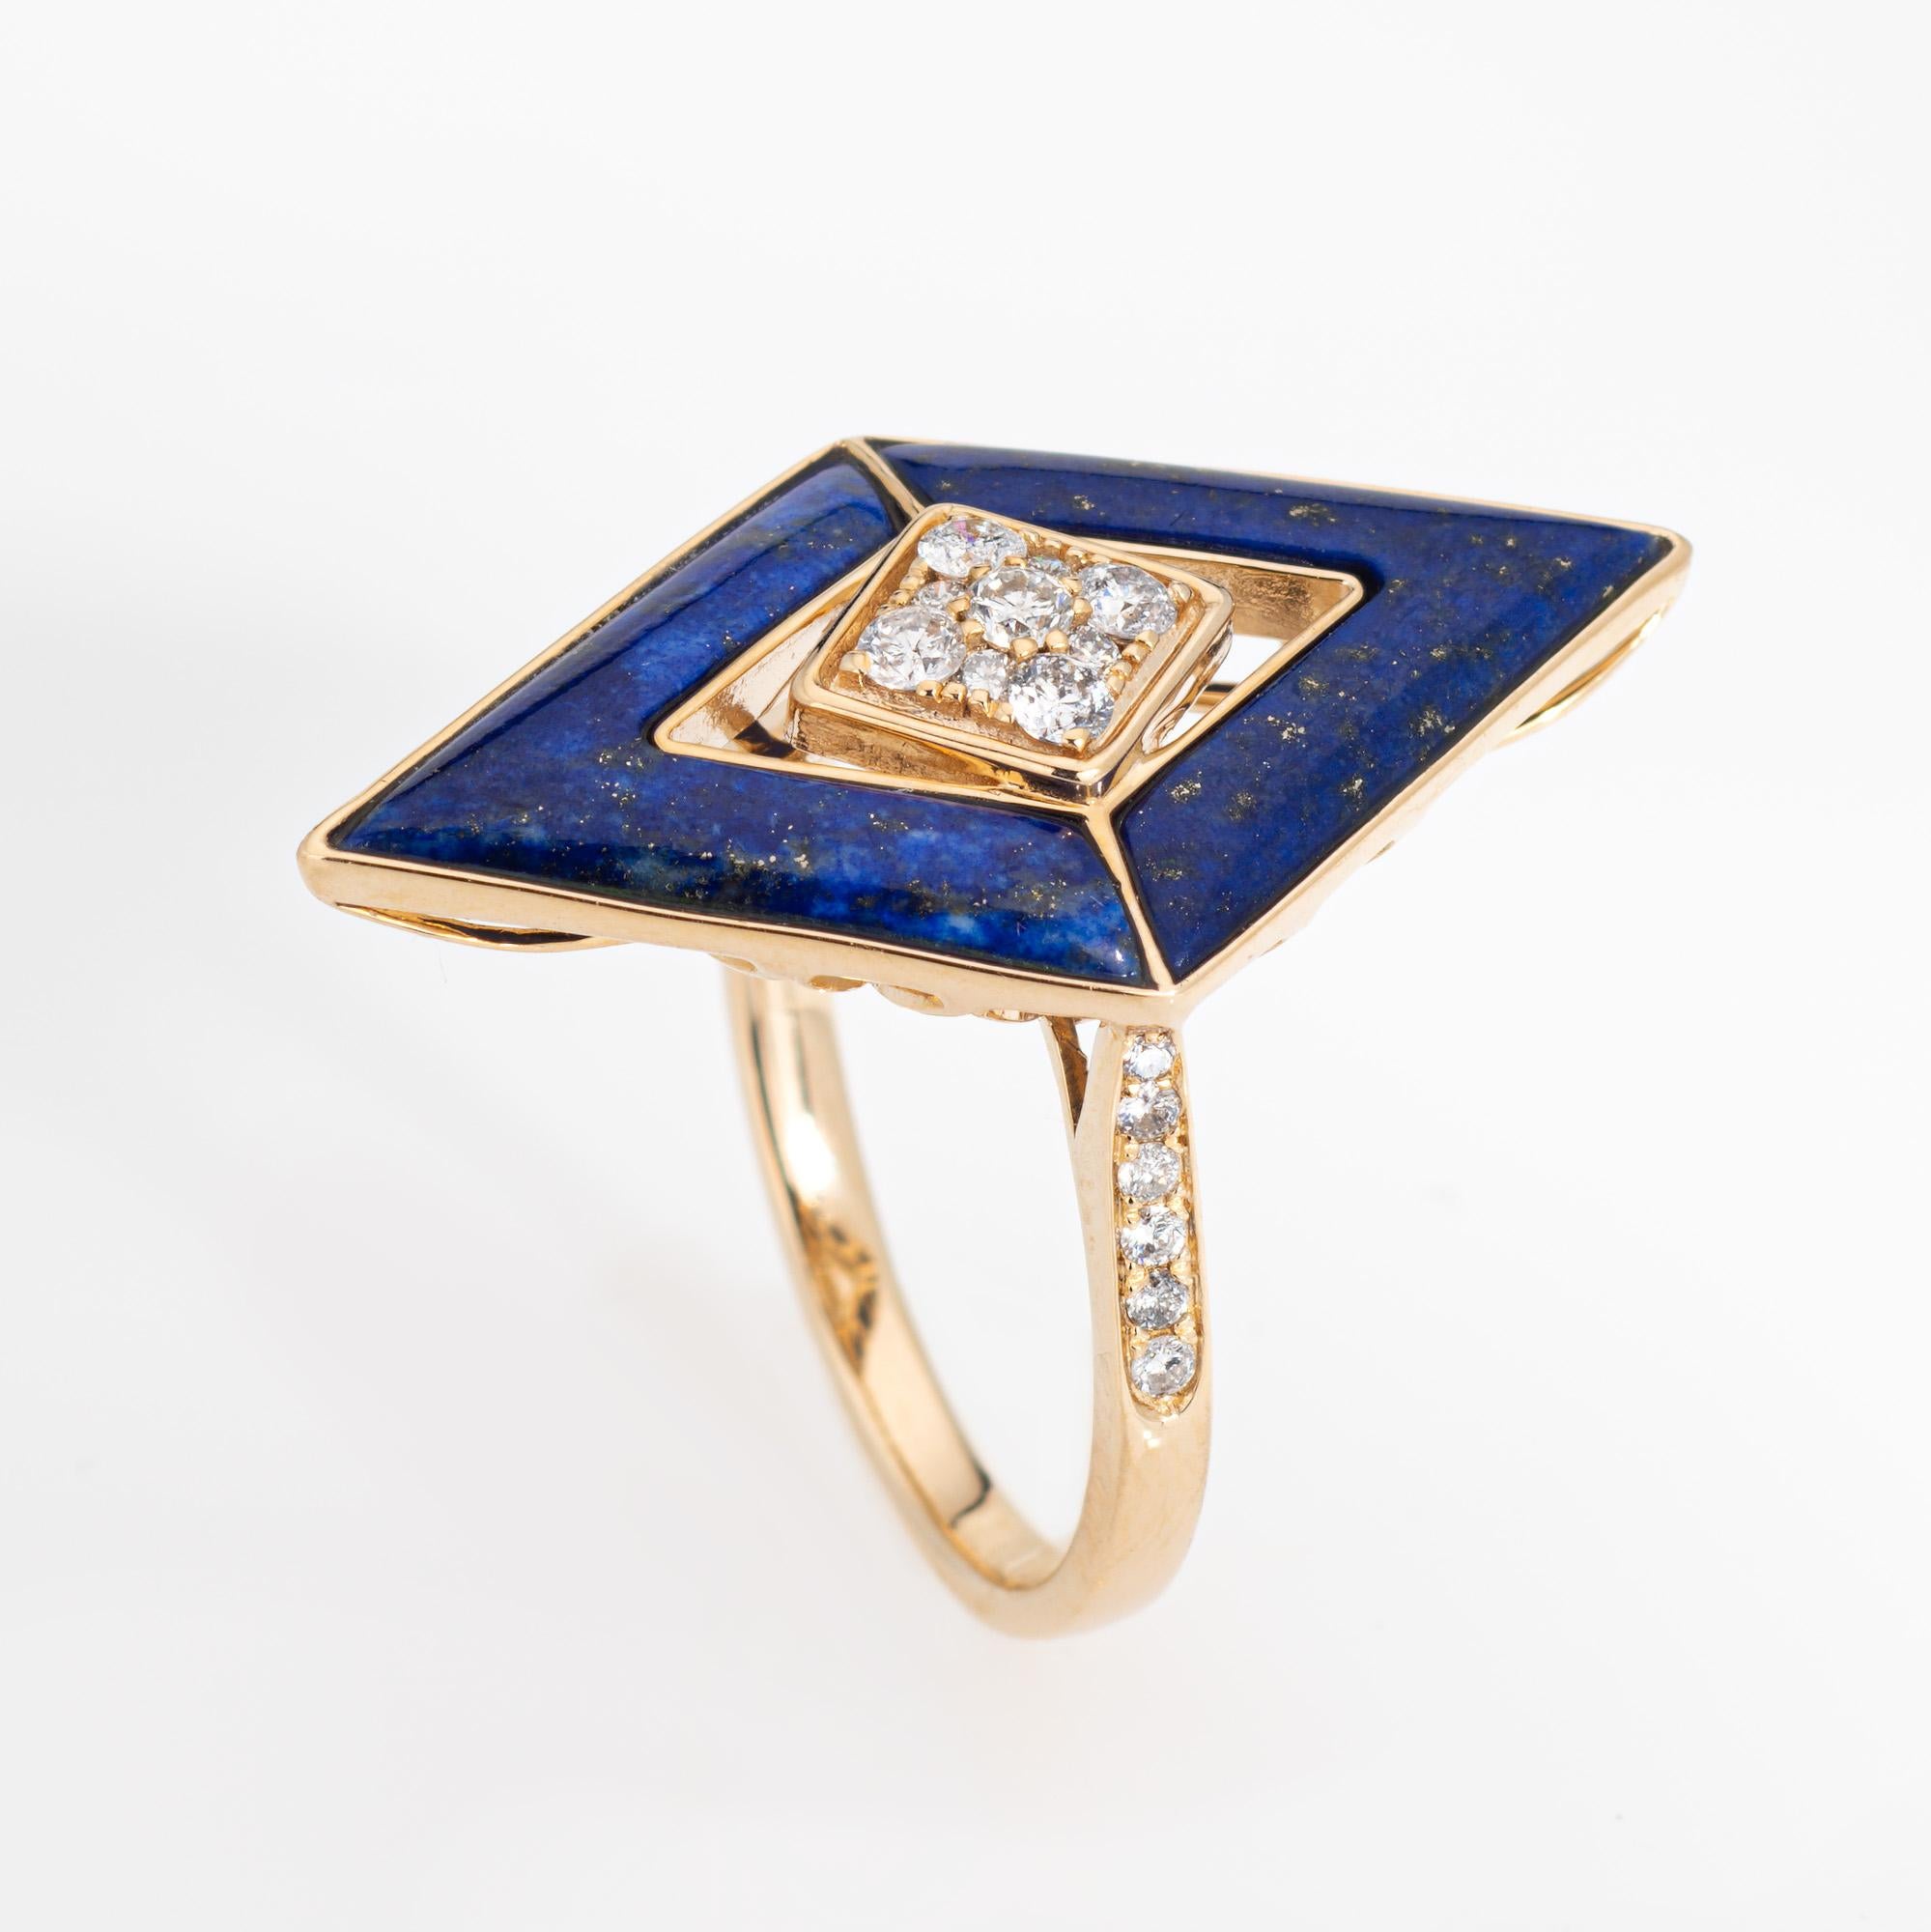 Stylish lapis lazuli & diamond cocktail ring crafted in 14 karat yellow gold. 

Diamonds total an estimated 0.12 carats (estimated at H-I color and SI1-I2 clarity). The lapis measures 15mm x 3mm (4 piefces). The lapis is in very good condition and